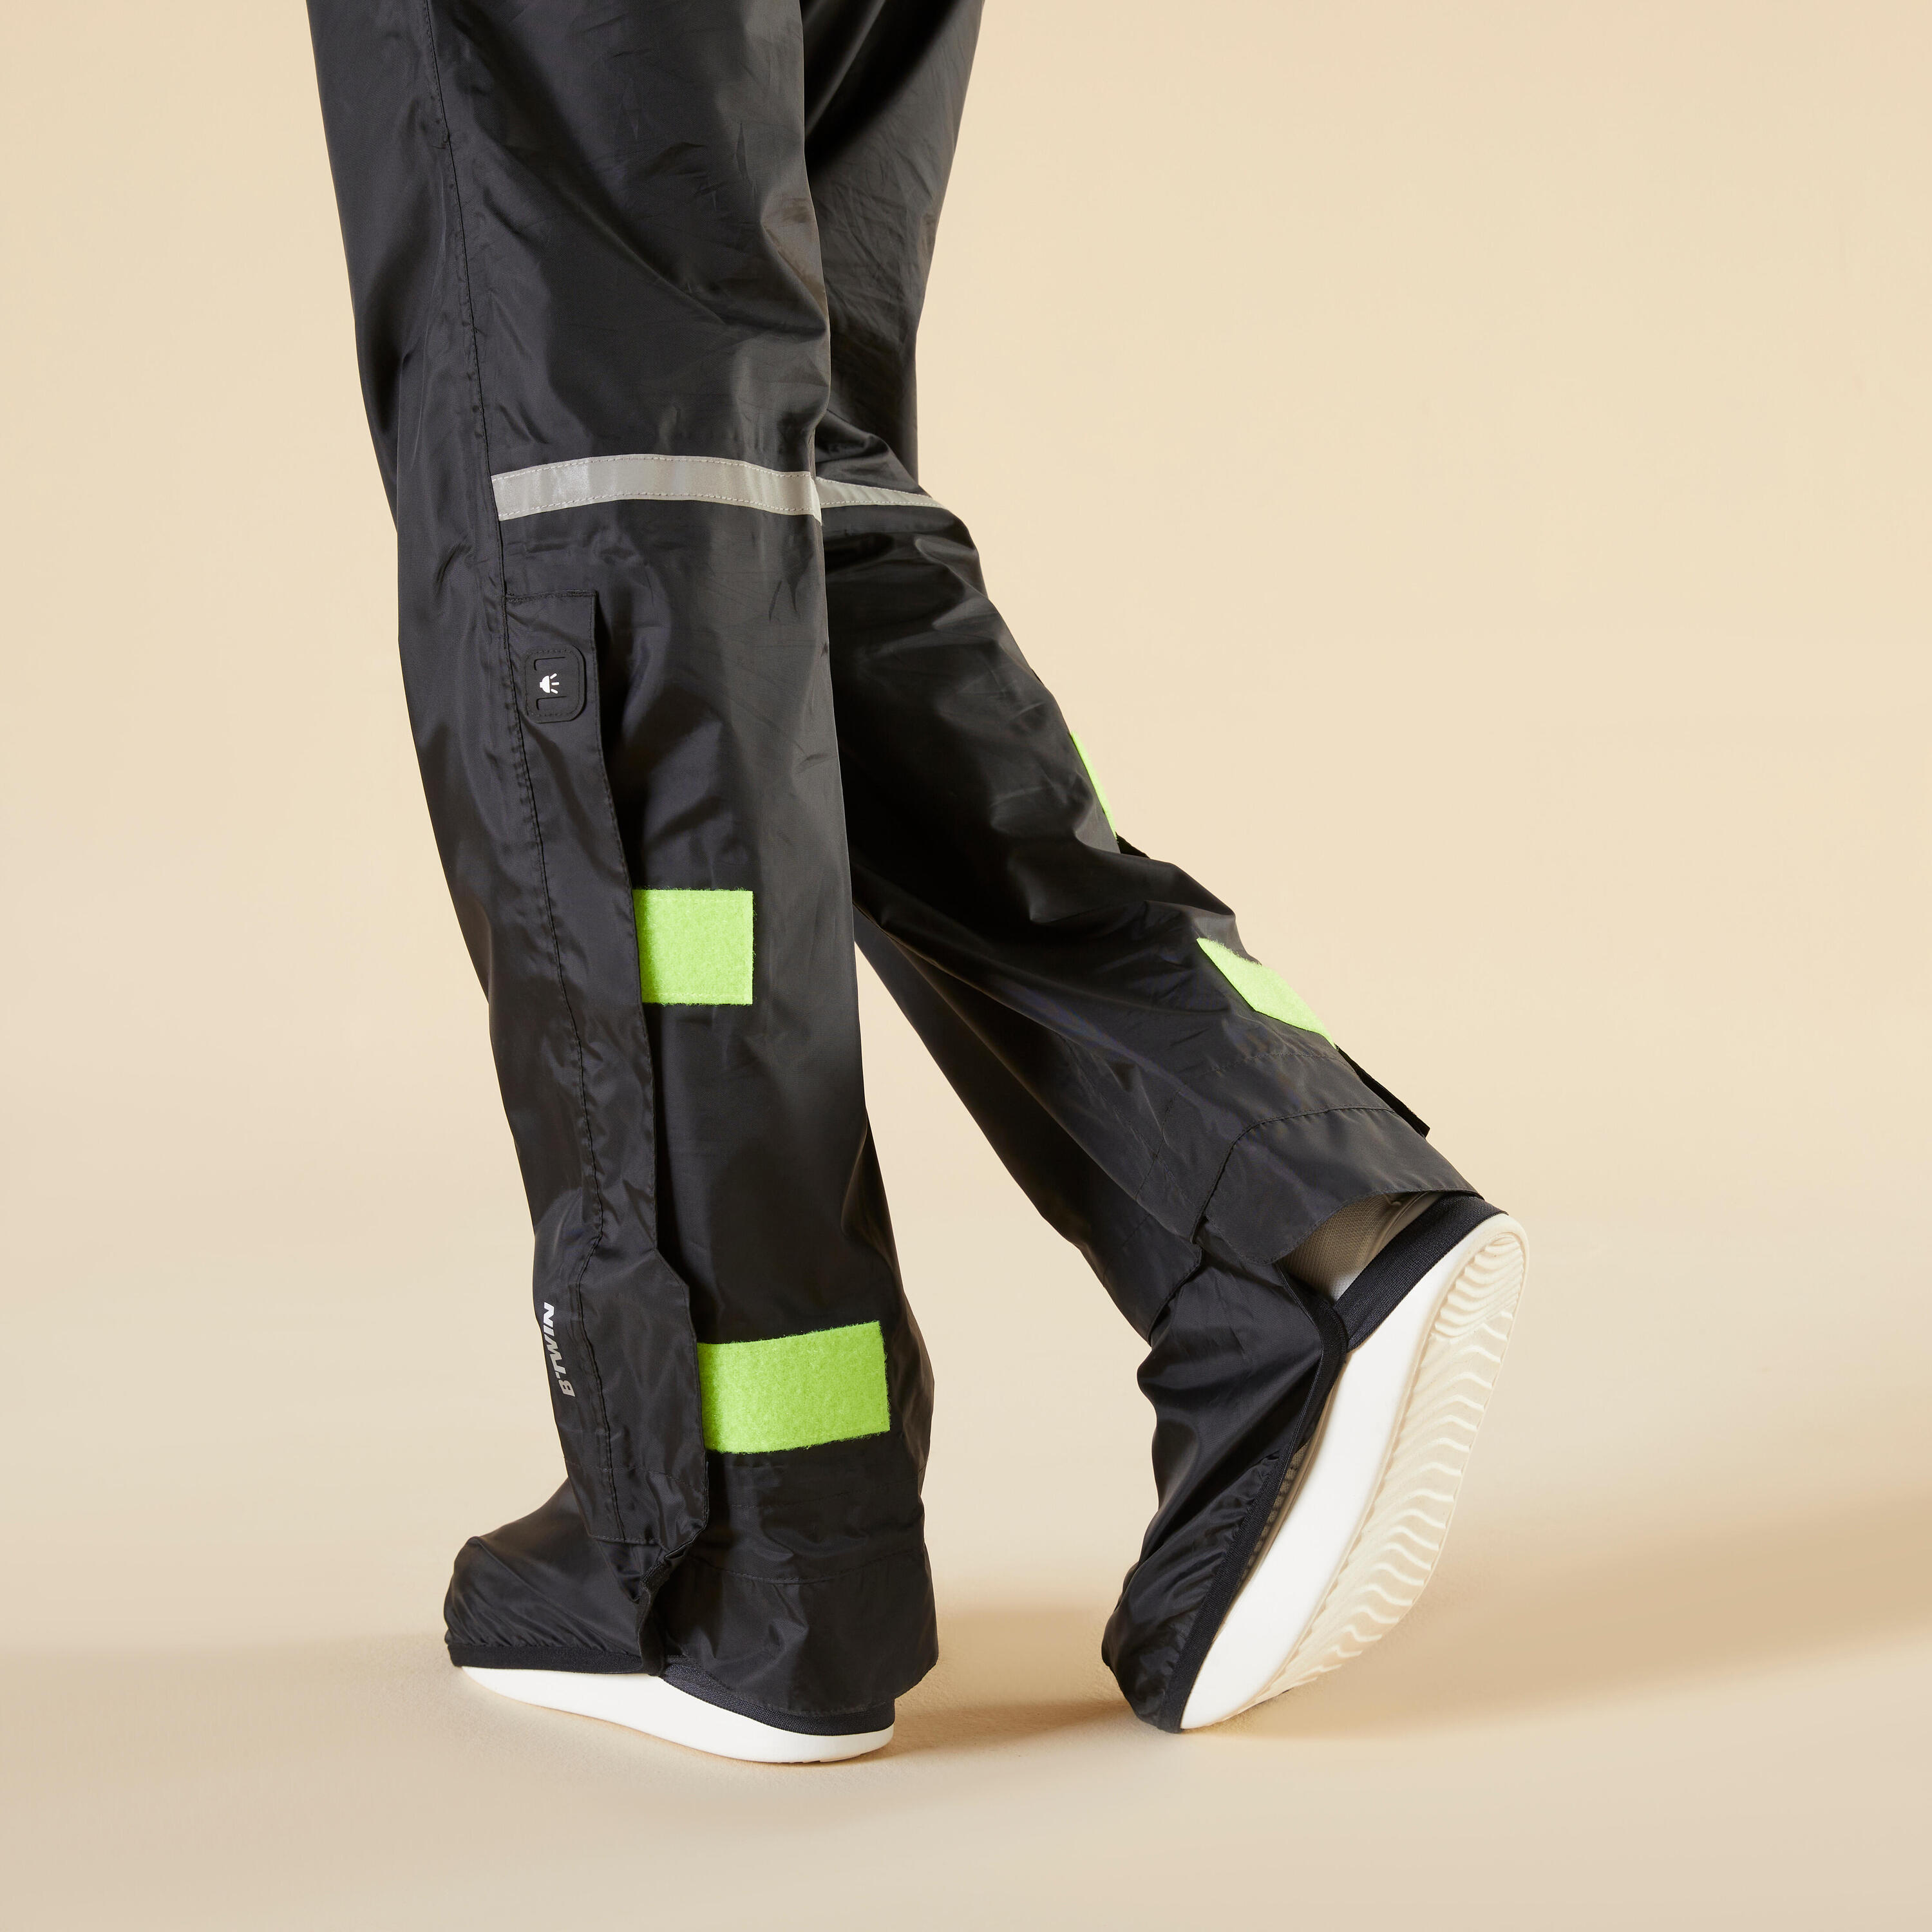 City Cycling Rain Overtrousers with Built-In Overshoes 100 - Black 4/15